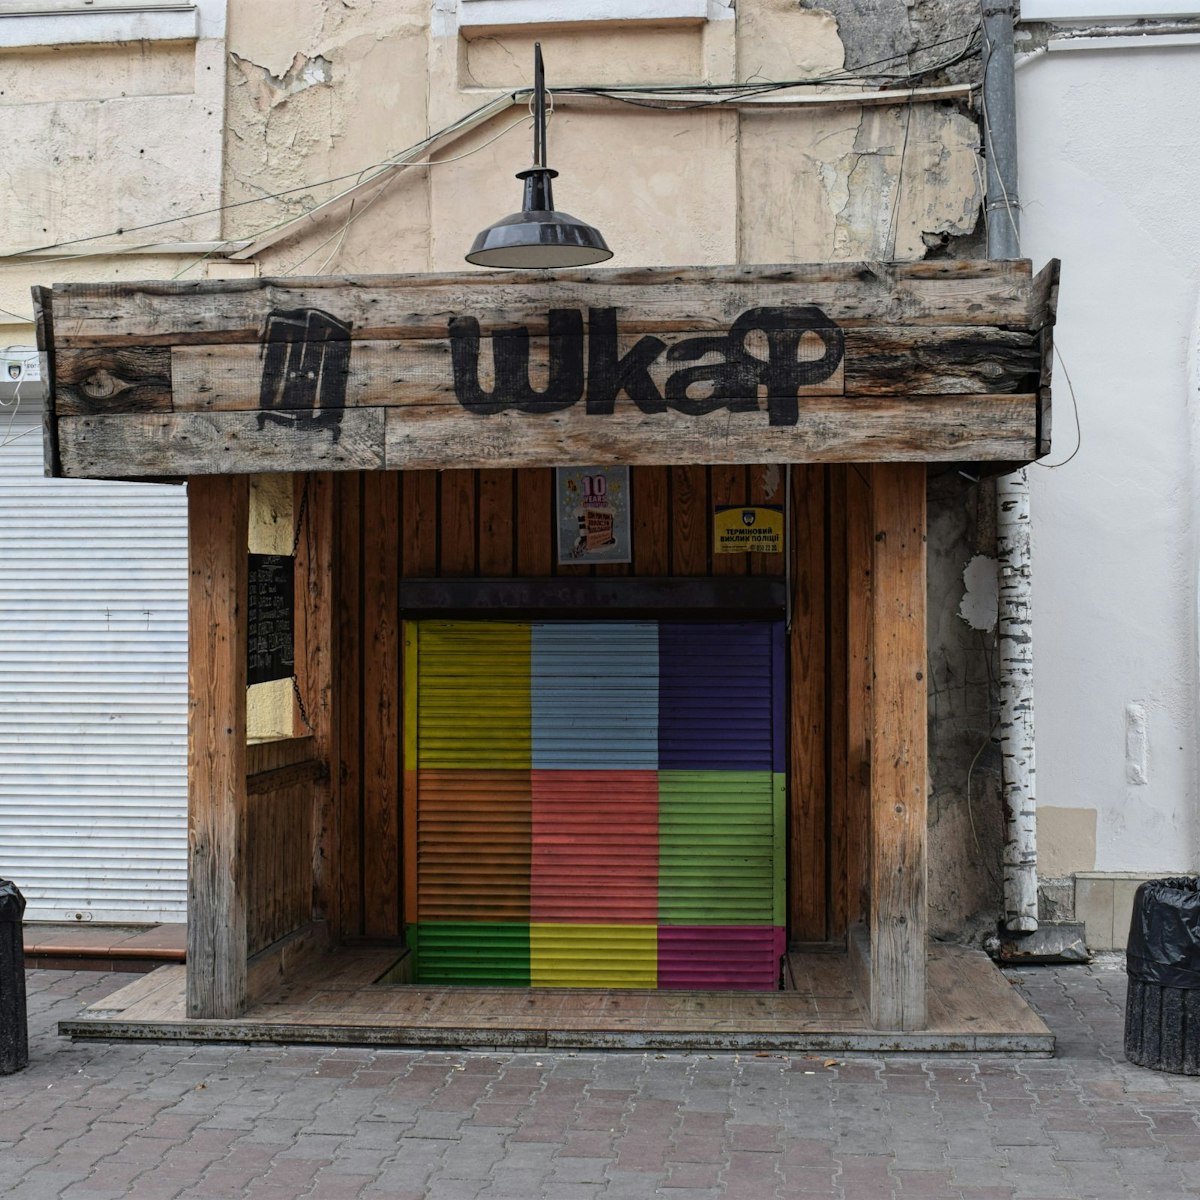 The entrance to Shkaf, a basement bar and club in Odesa